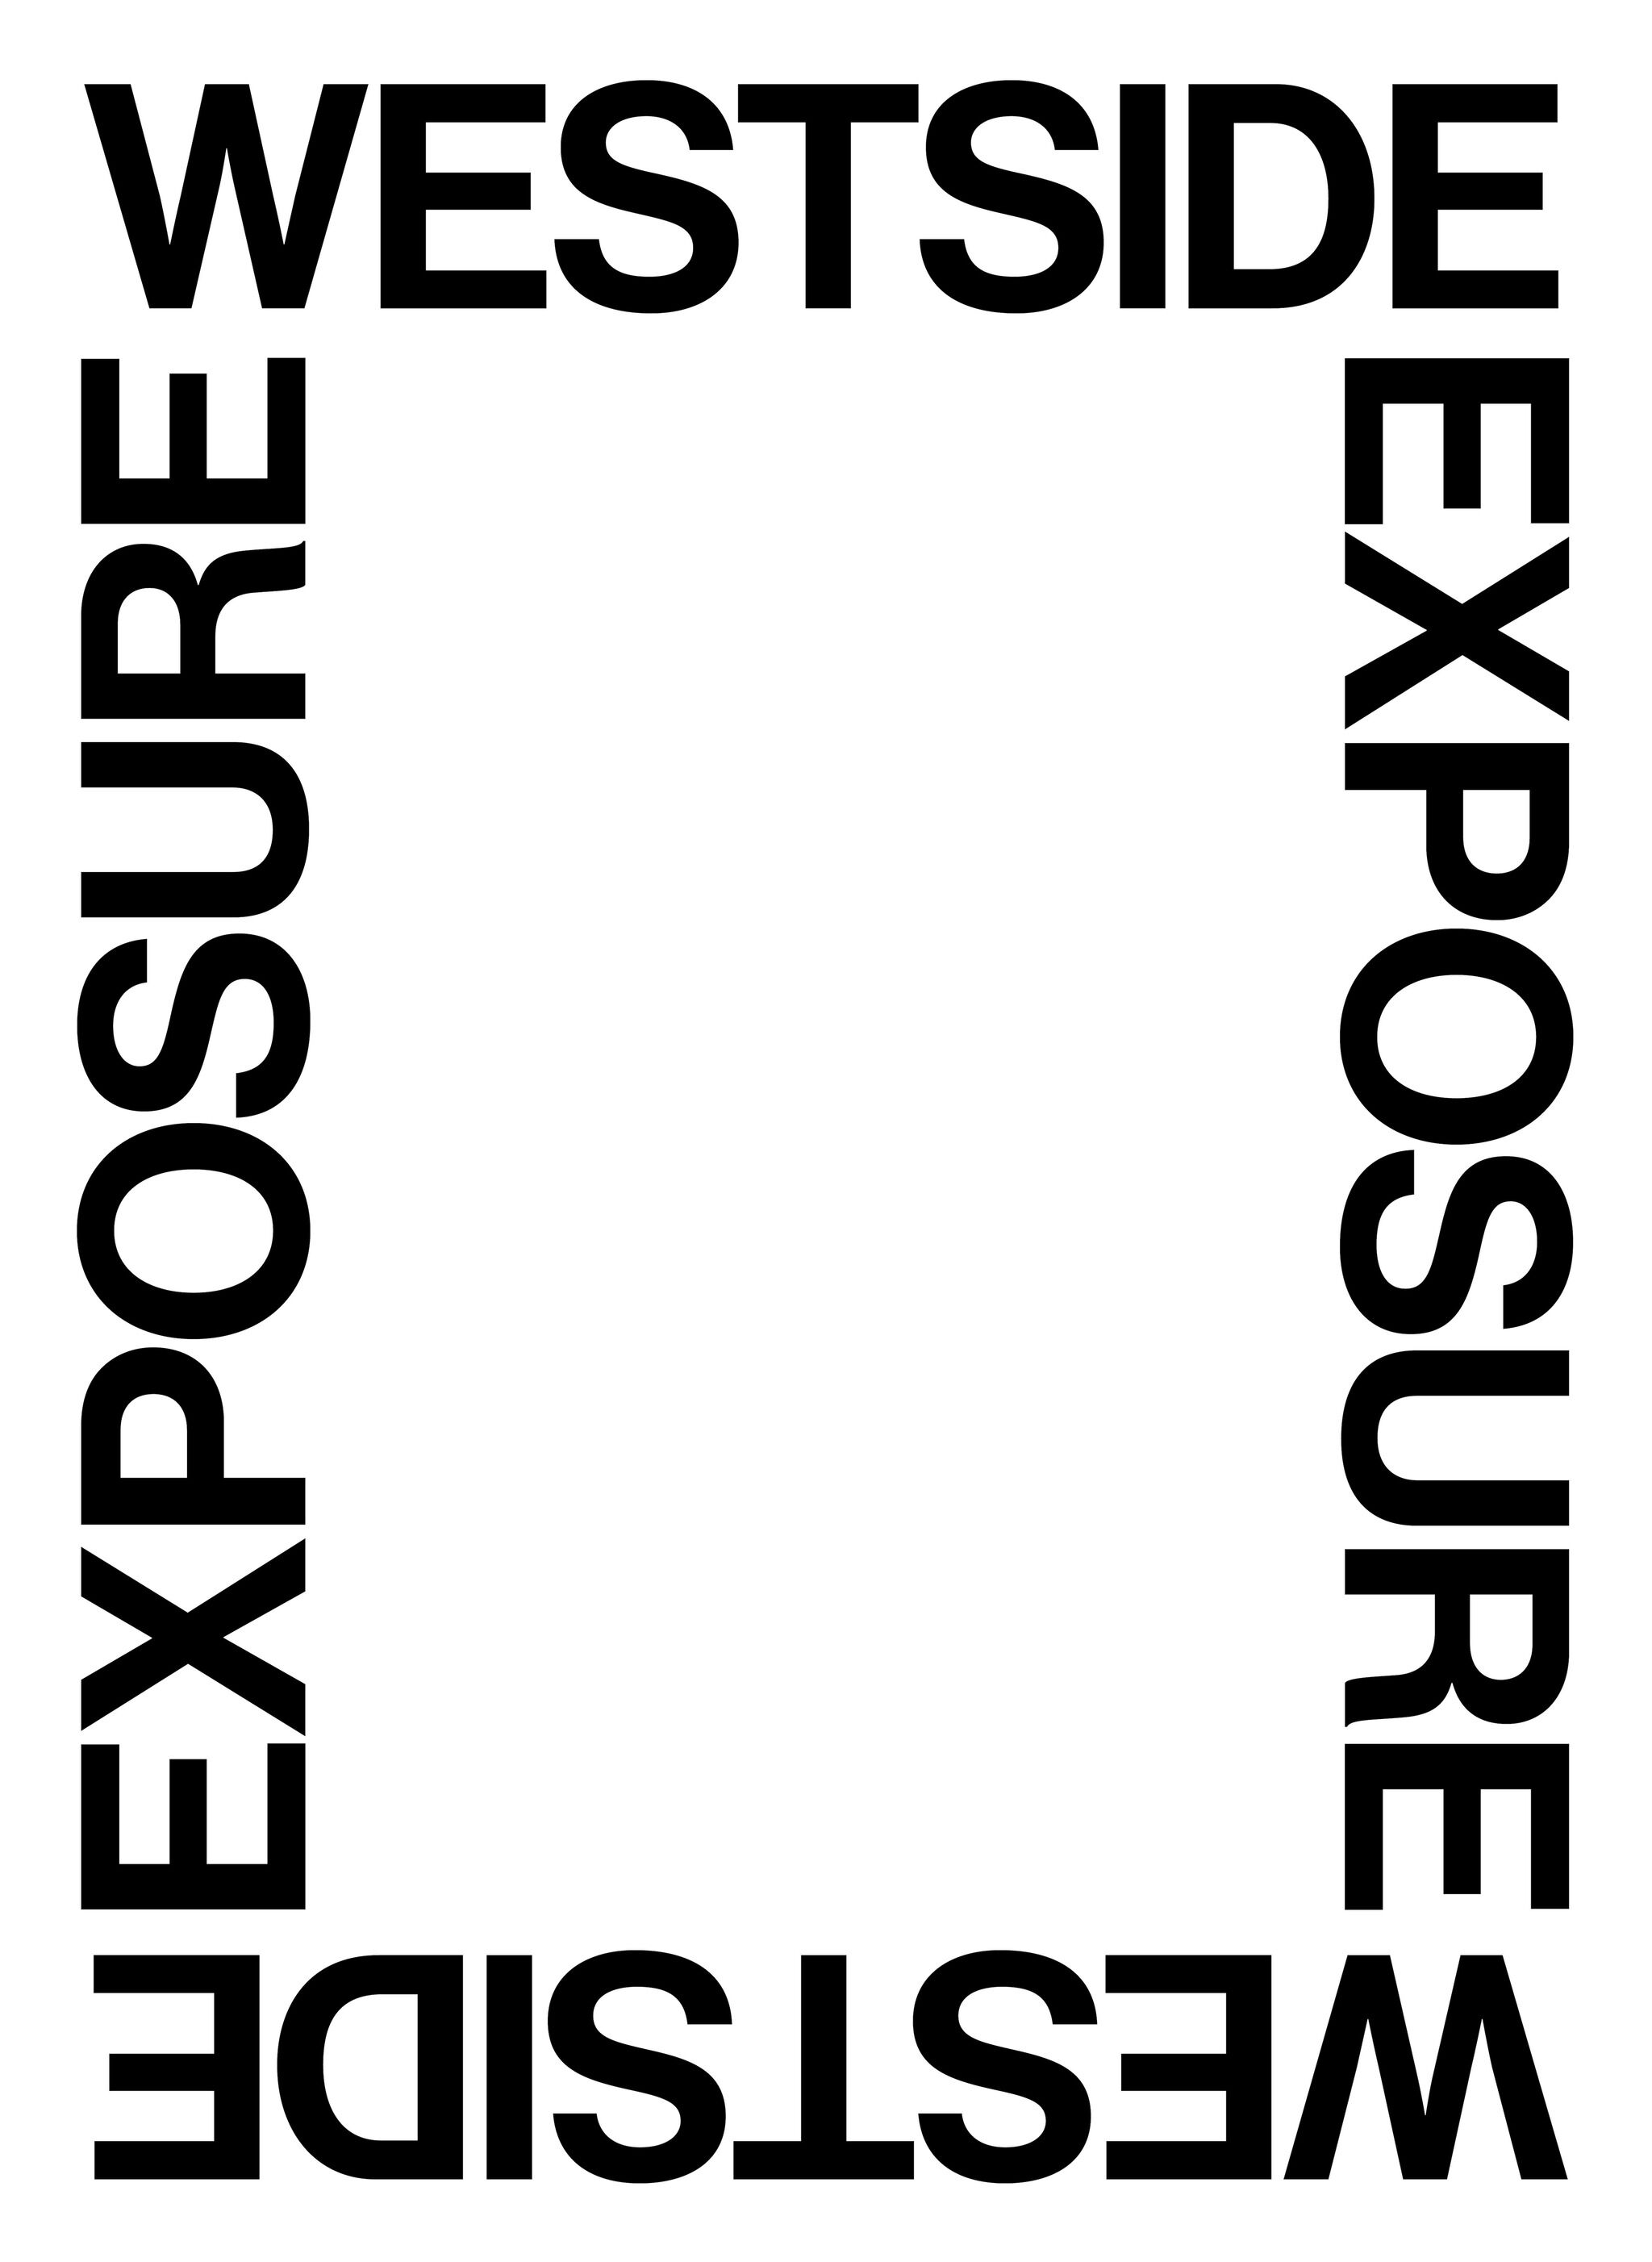 The words "Westside Exposure" written four times to form a square shape.